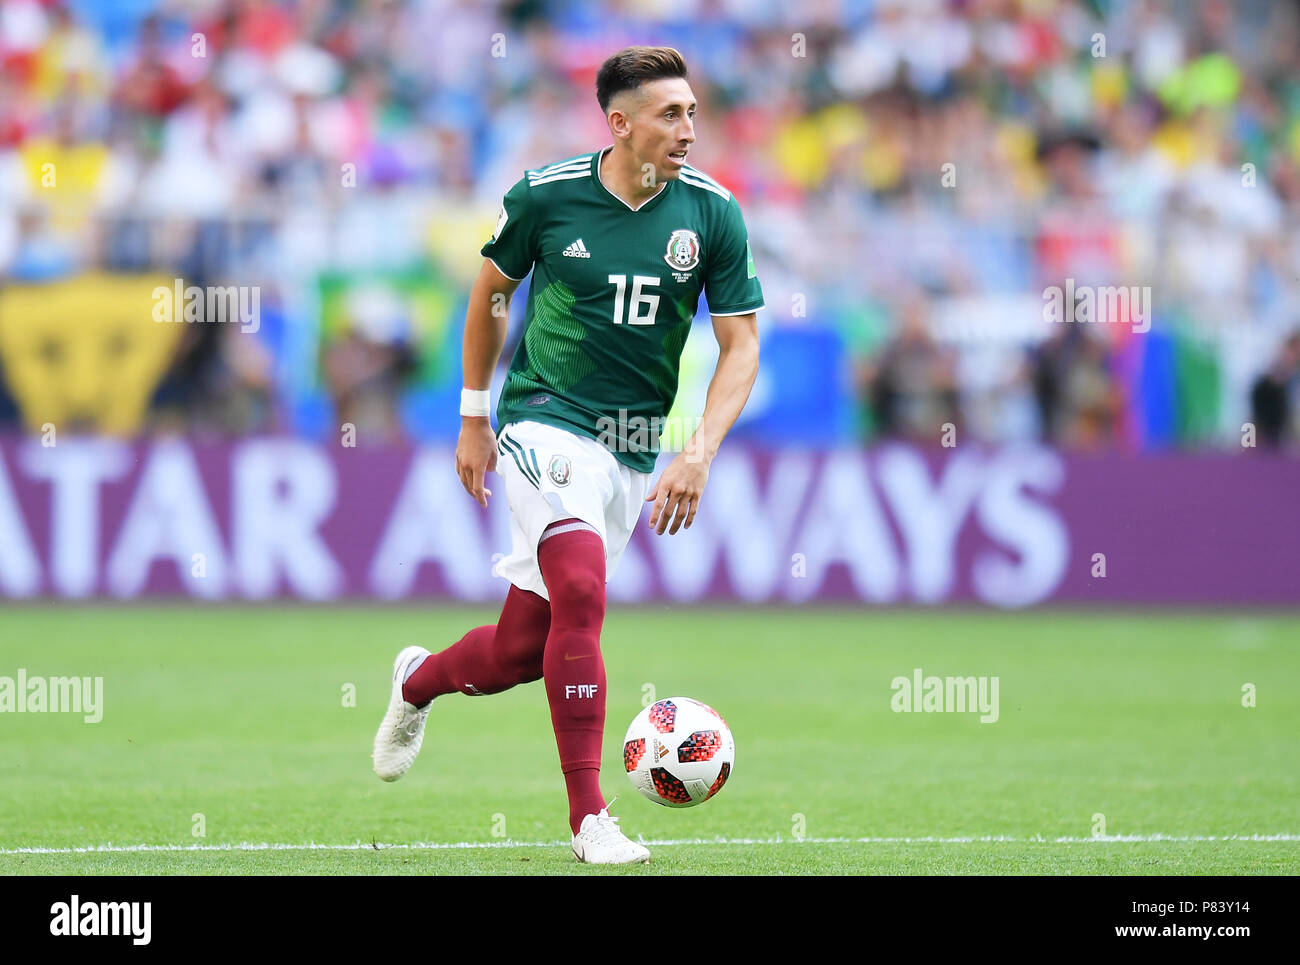 SAMARA, RUSSIA - JULY 02: Hector Herrera of Mexico in action during the 2018 FIFA World Cup Russia Round of 16 match between Brazil and Mexico at Samara Arena on July 2, 2018 in Samara, Russia. (Photo by Lukasz Laskowski/PressFocus/MB Media) Stock Photo